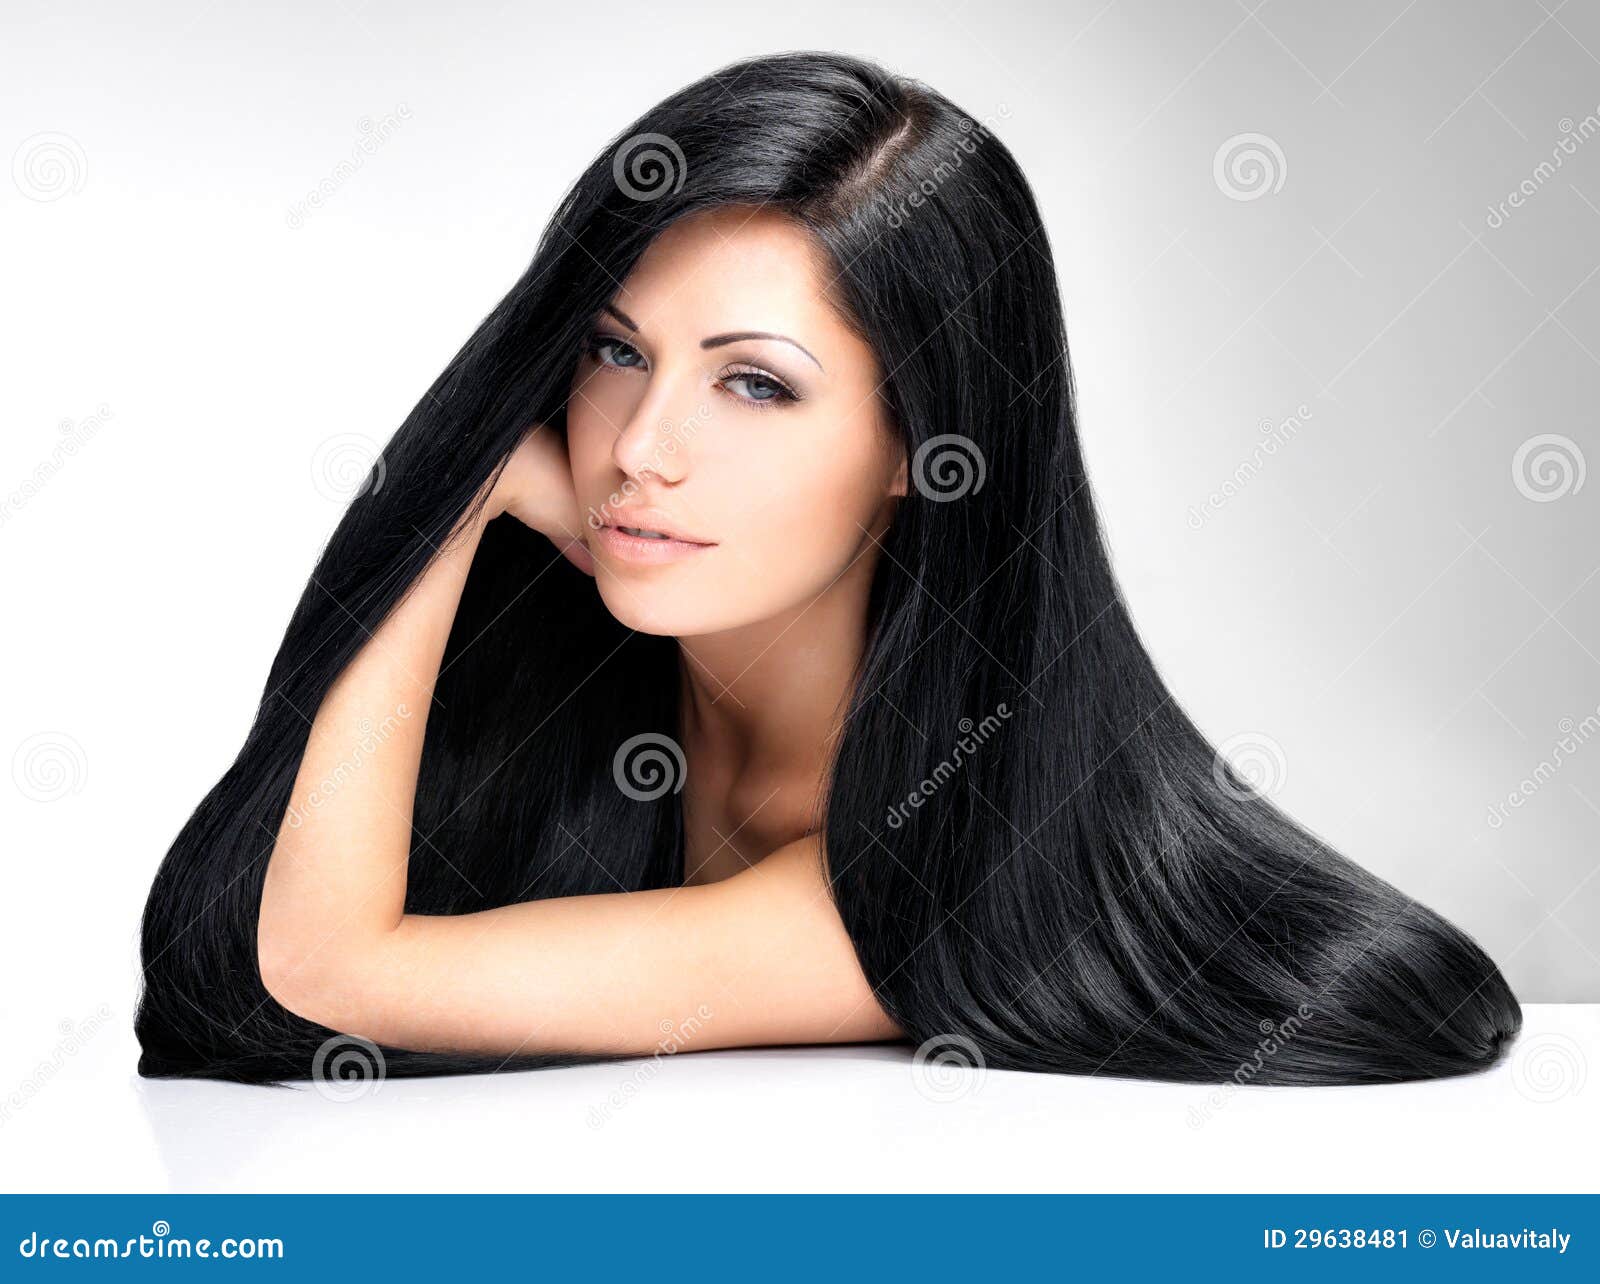 Beautiful brunette young woman has long dark hair poses indoor against  blue studio background being successful businesswoman has natural look  enjoys leisure or day off stands delighted  a Royalty Free Stock